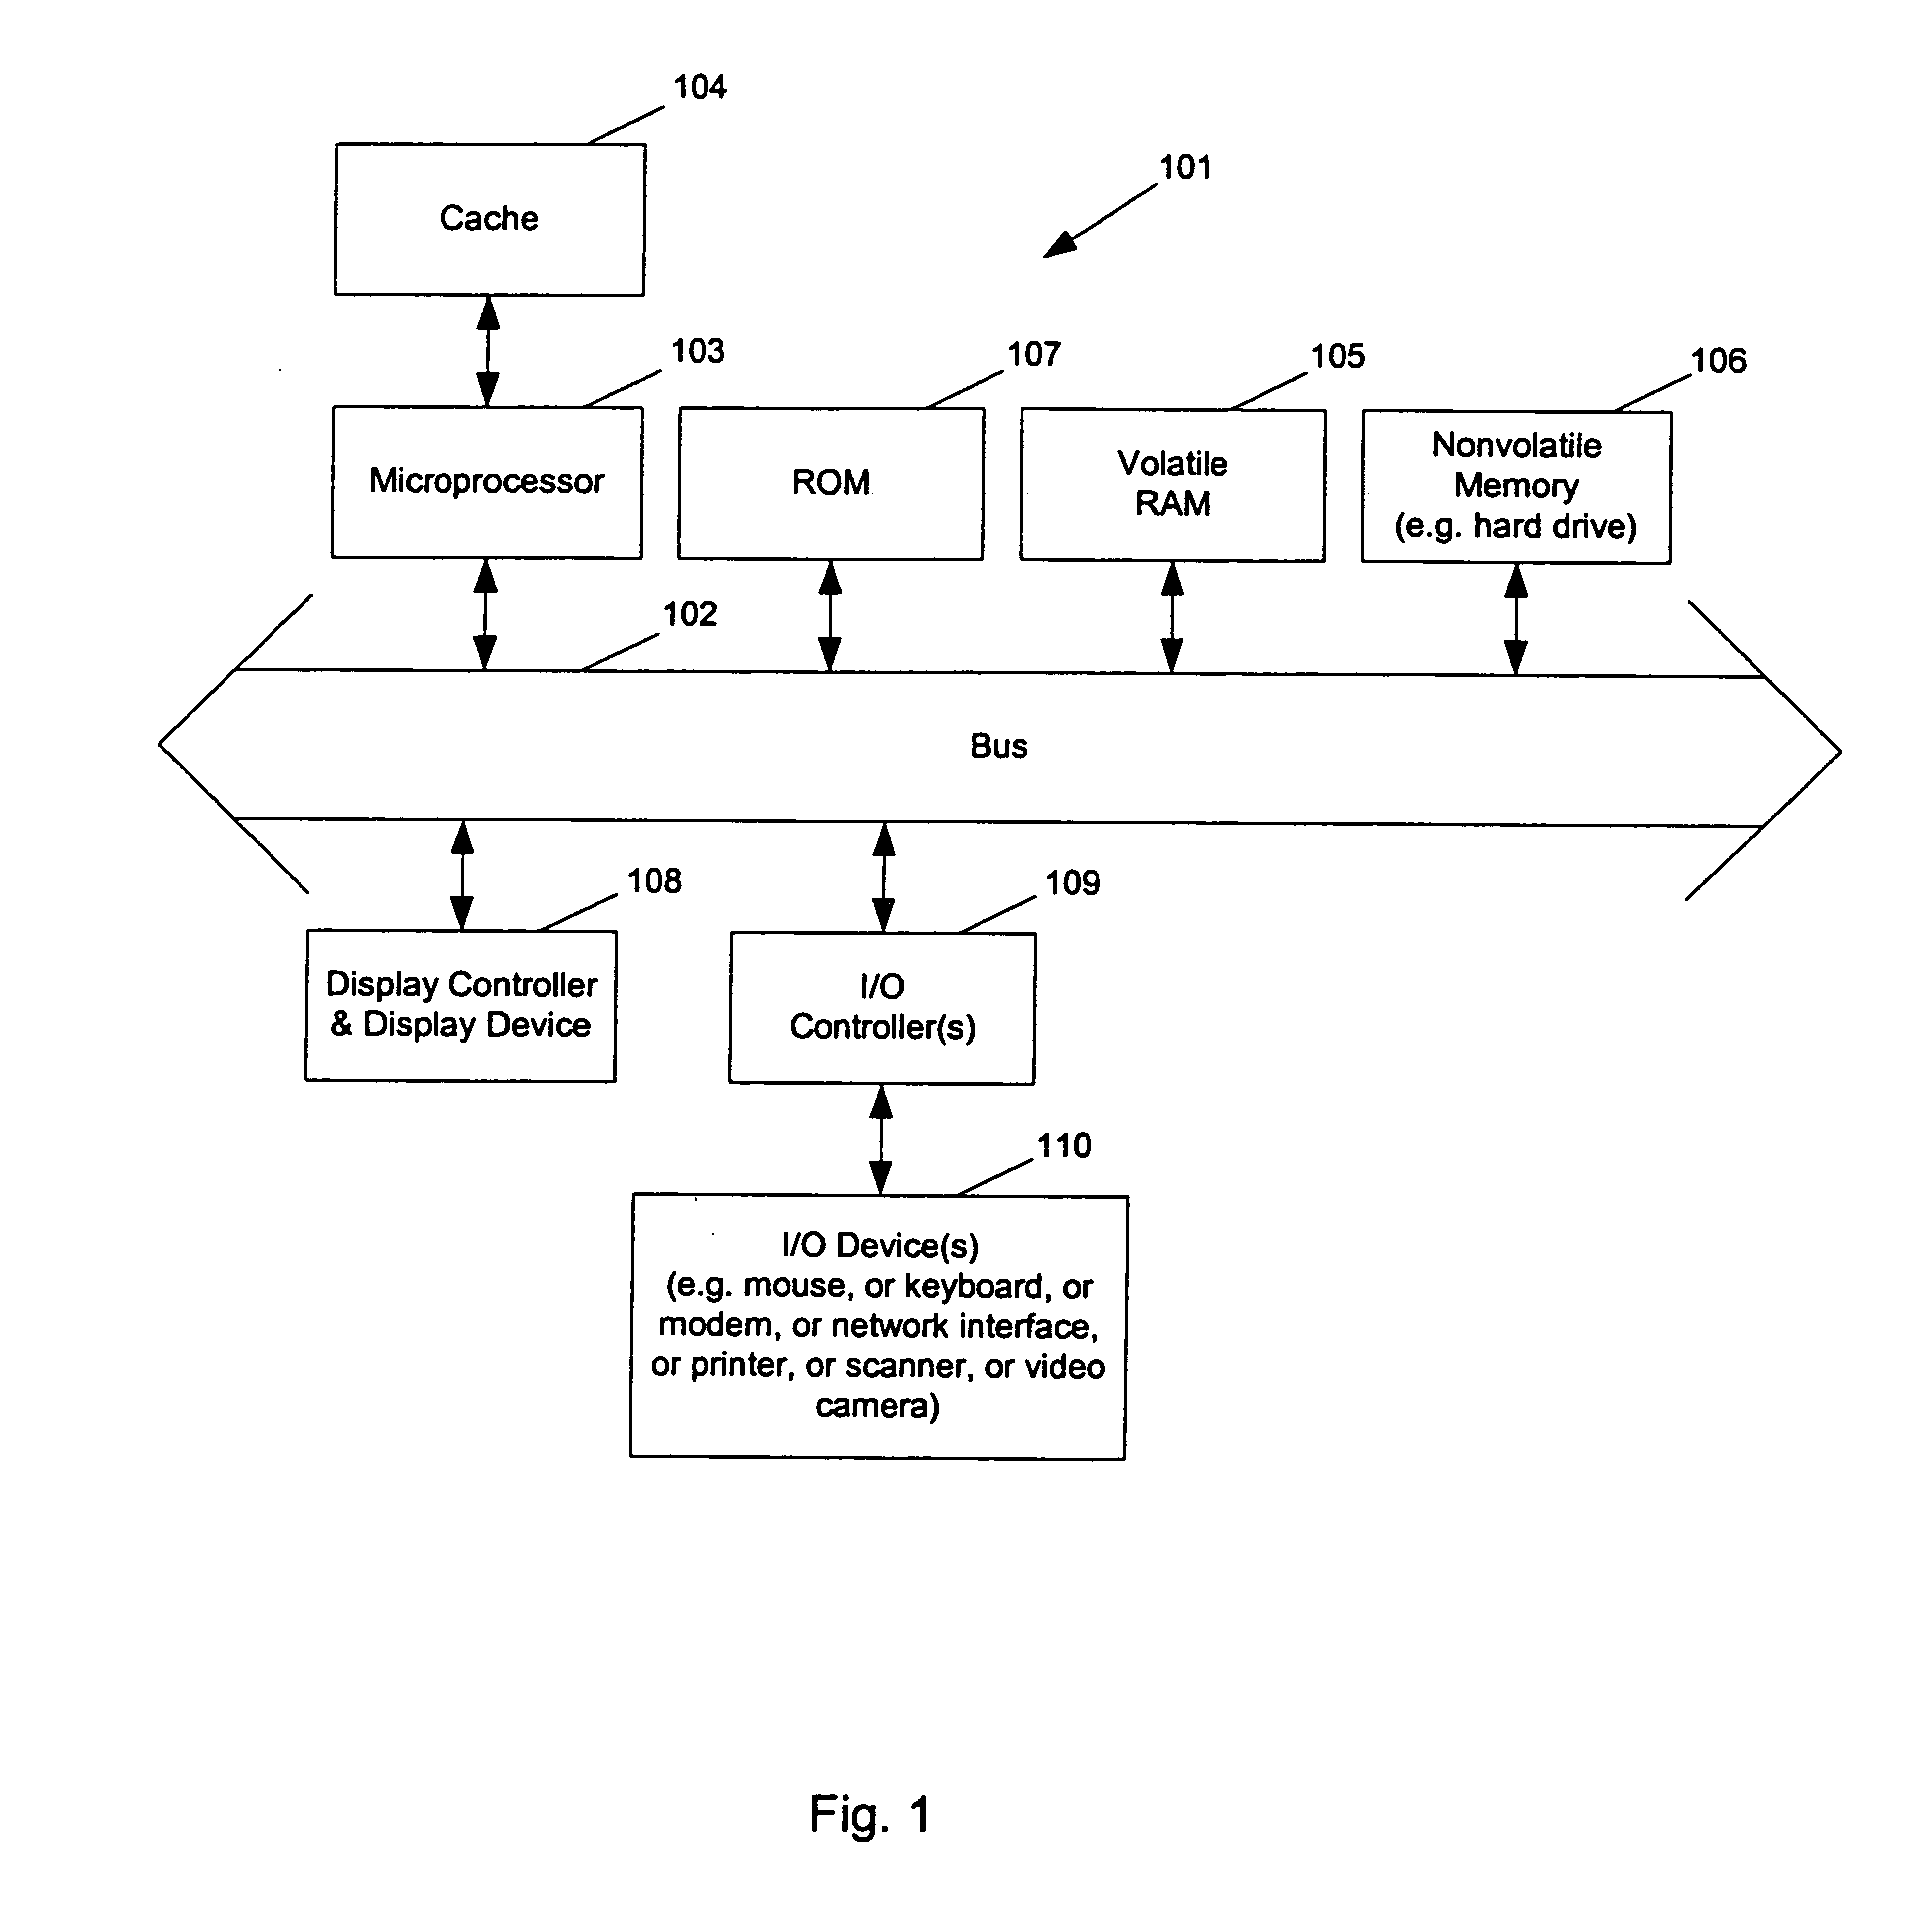 Method and apparatus for the design and analysis of digital circuits with time division multiplexing